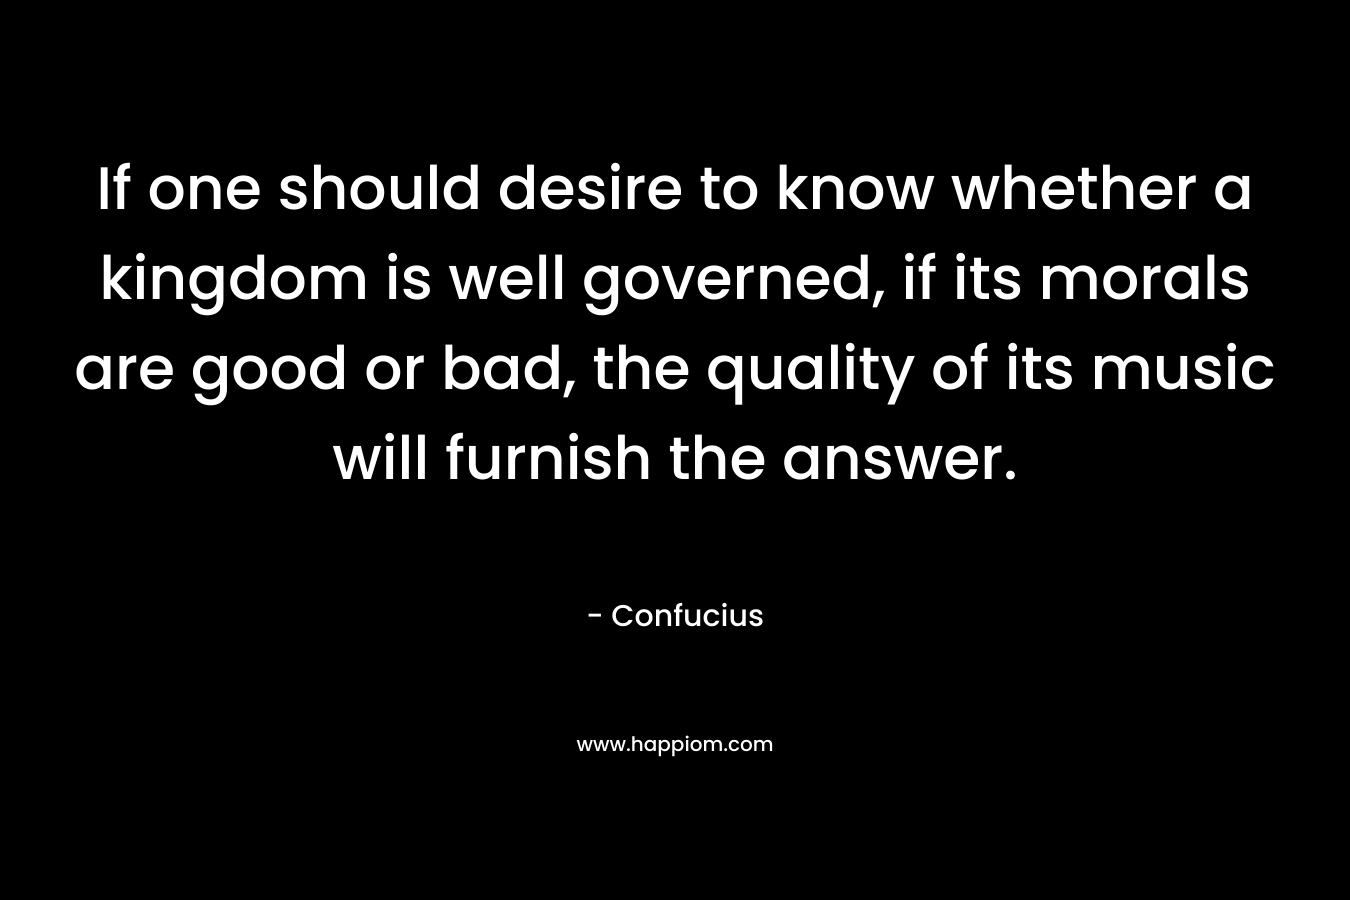 If one should desire to know whether a kingdom is well governed, if its morals are good or bad, the quality of its music will furnish the answer. – Confucius